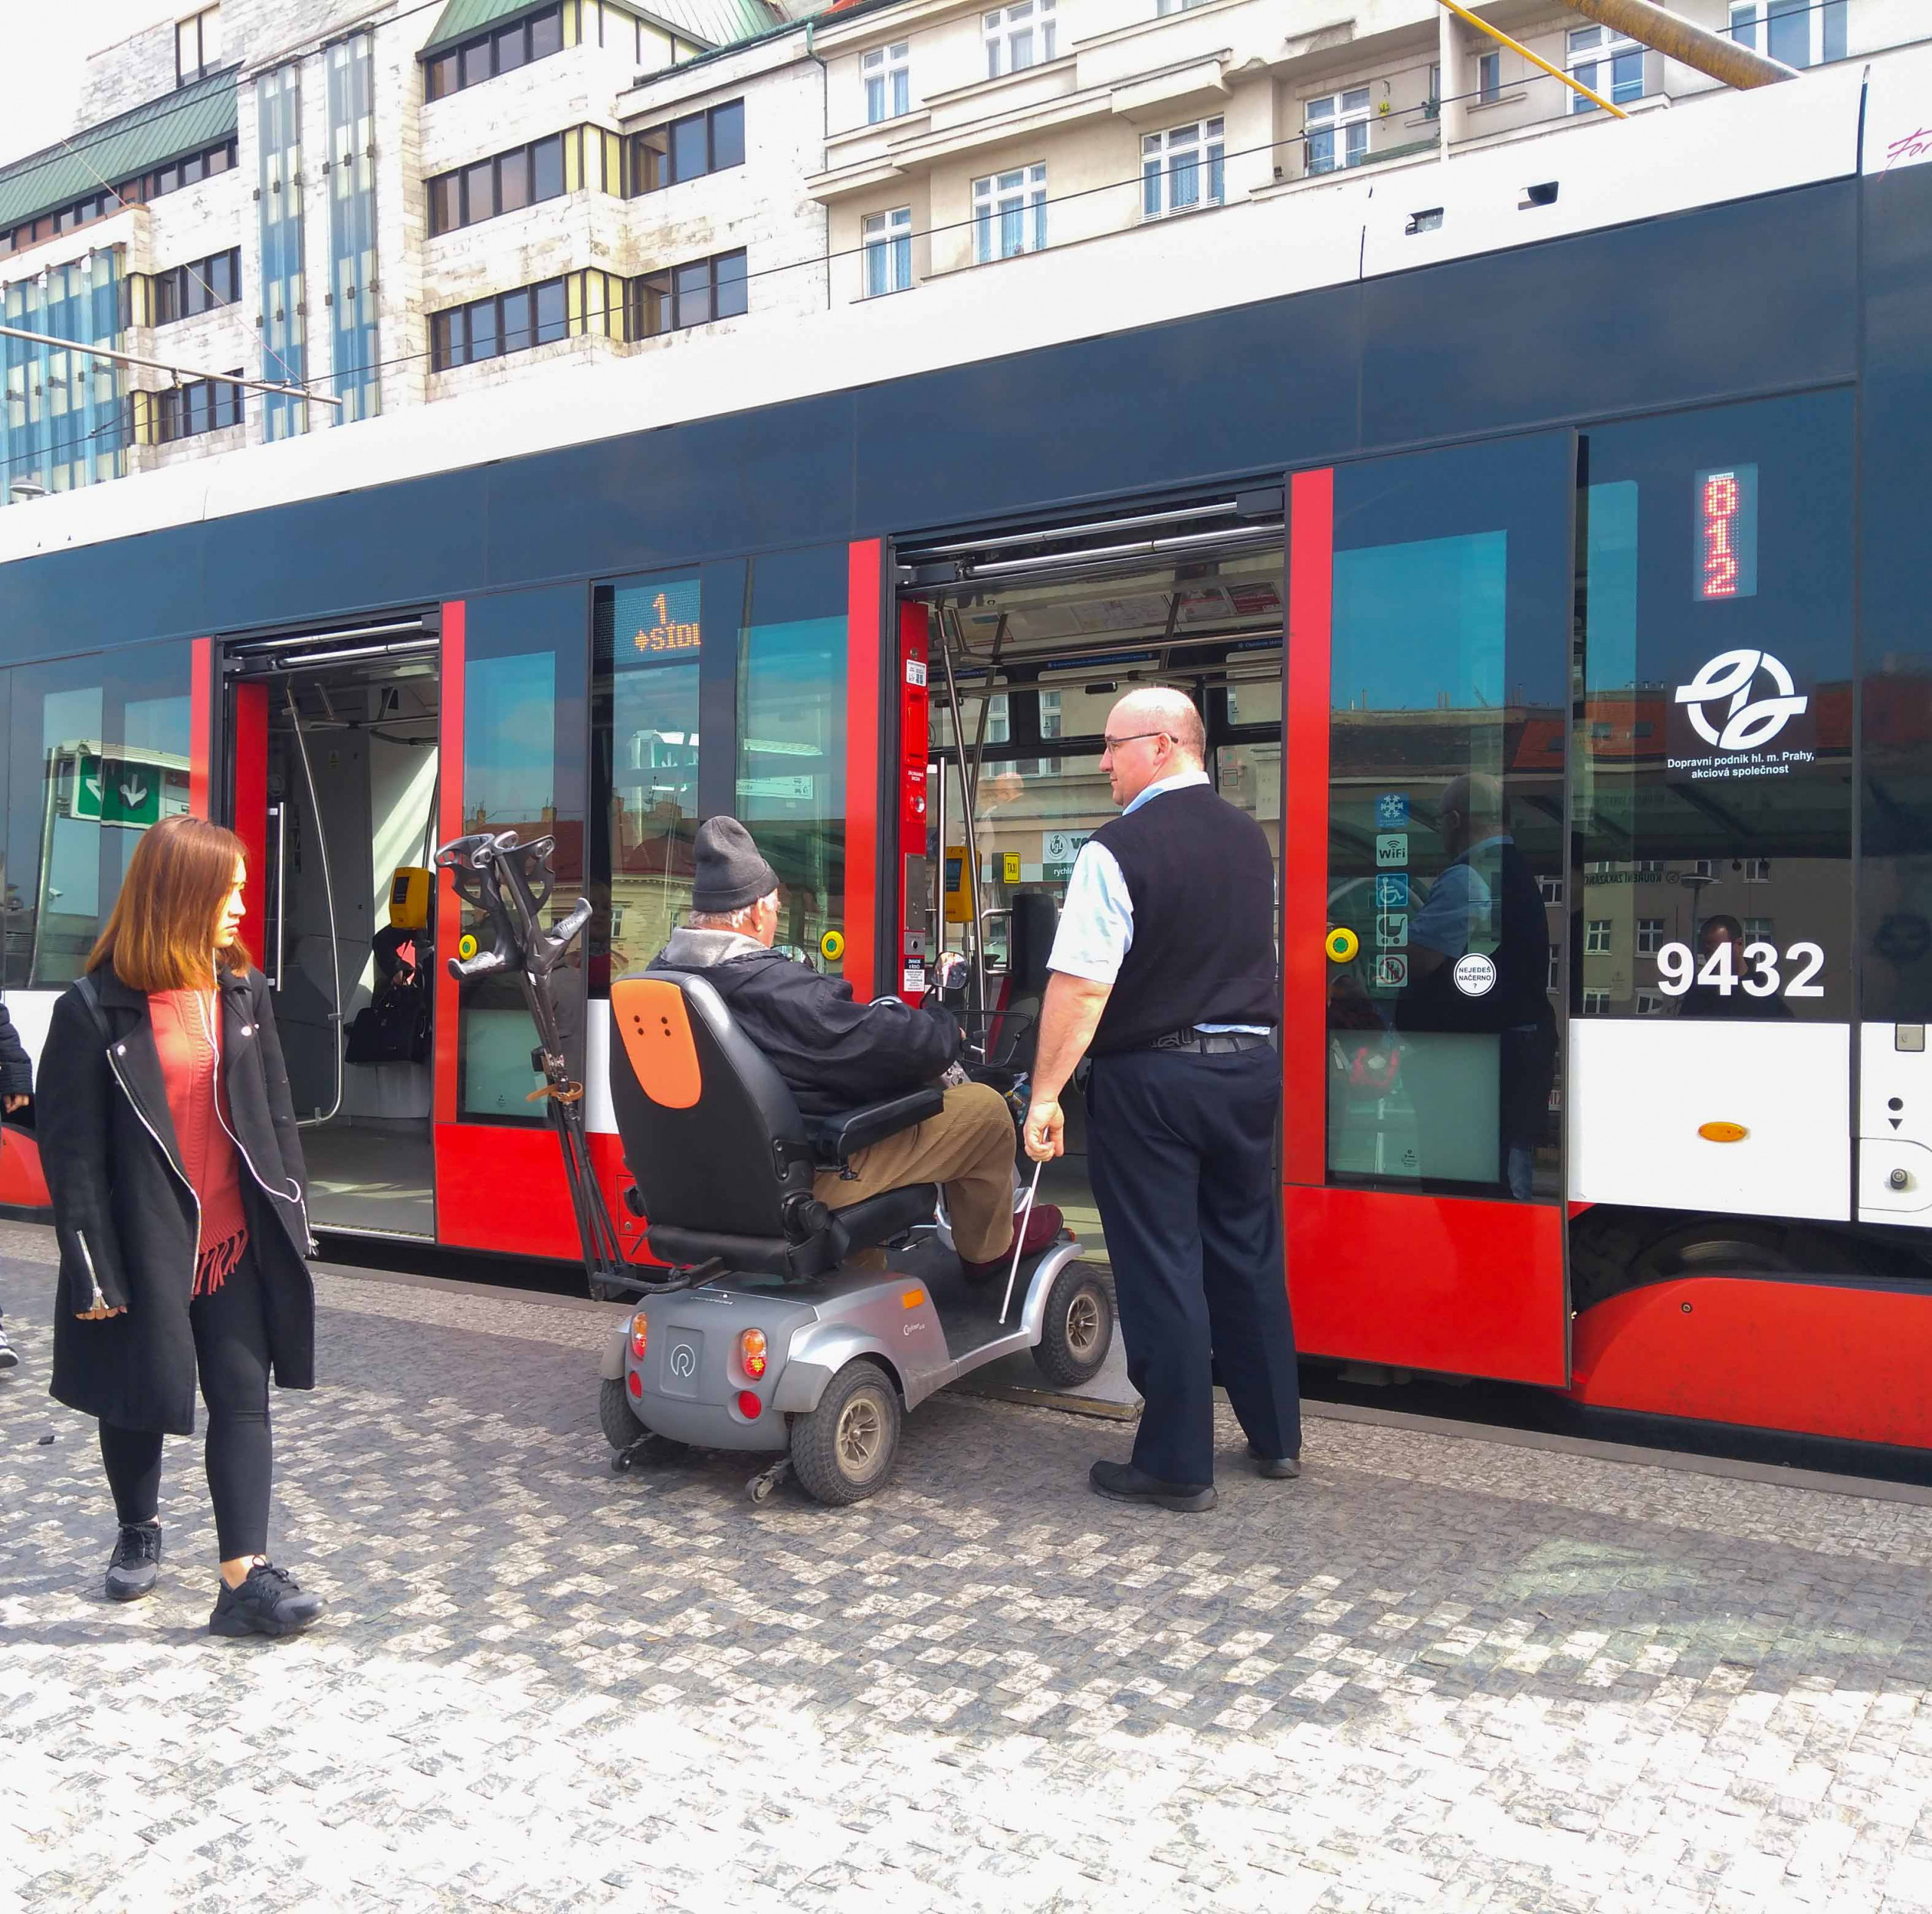 A tram driver helps a person with disabilities enter a tram in an electric wheelchair